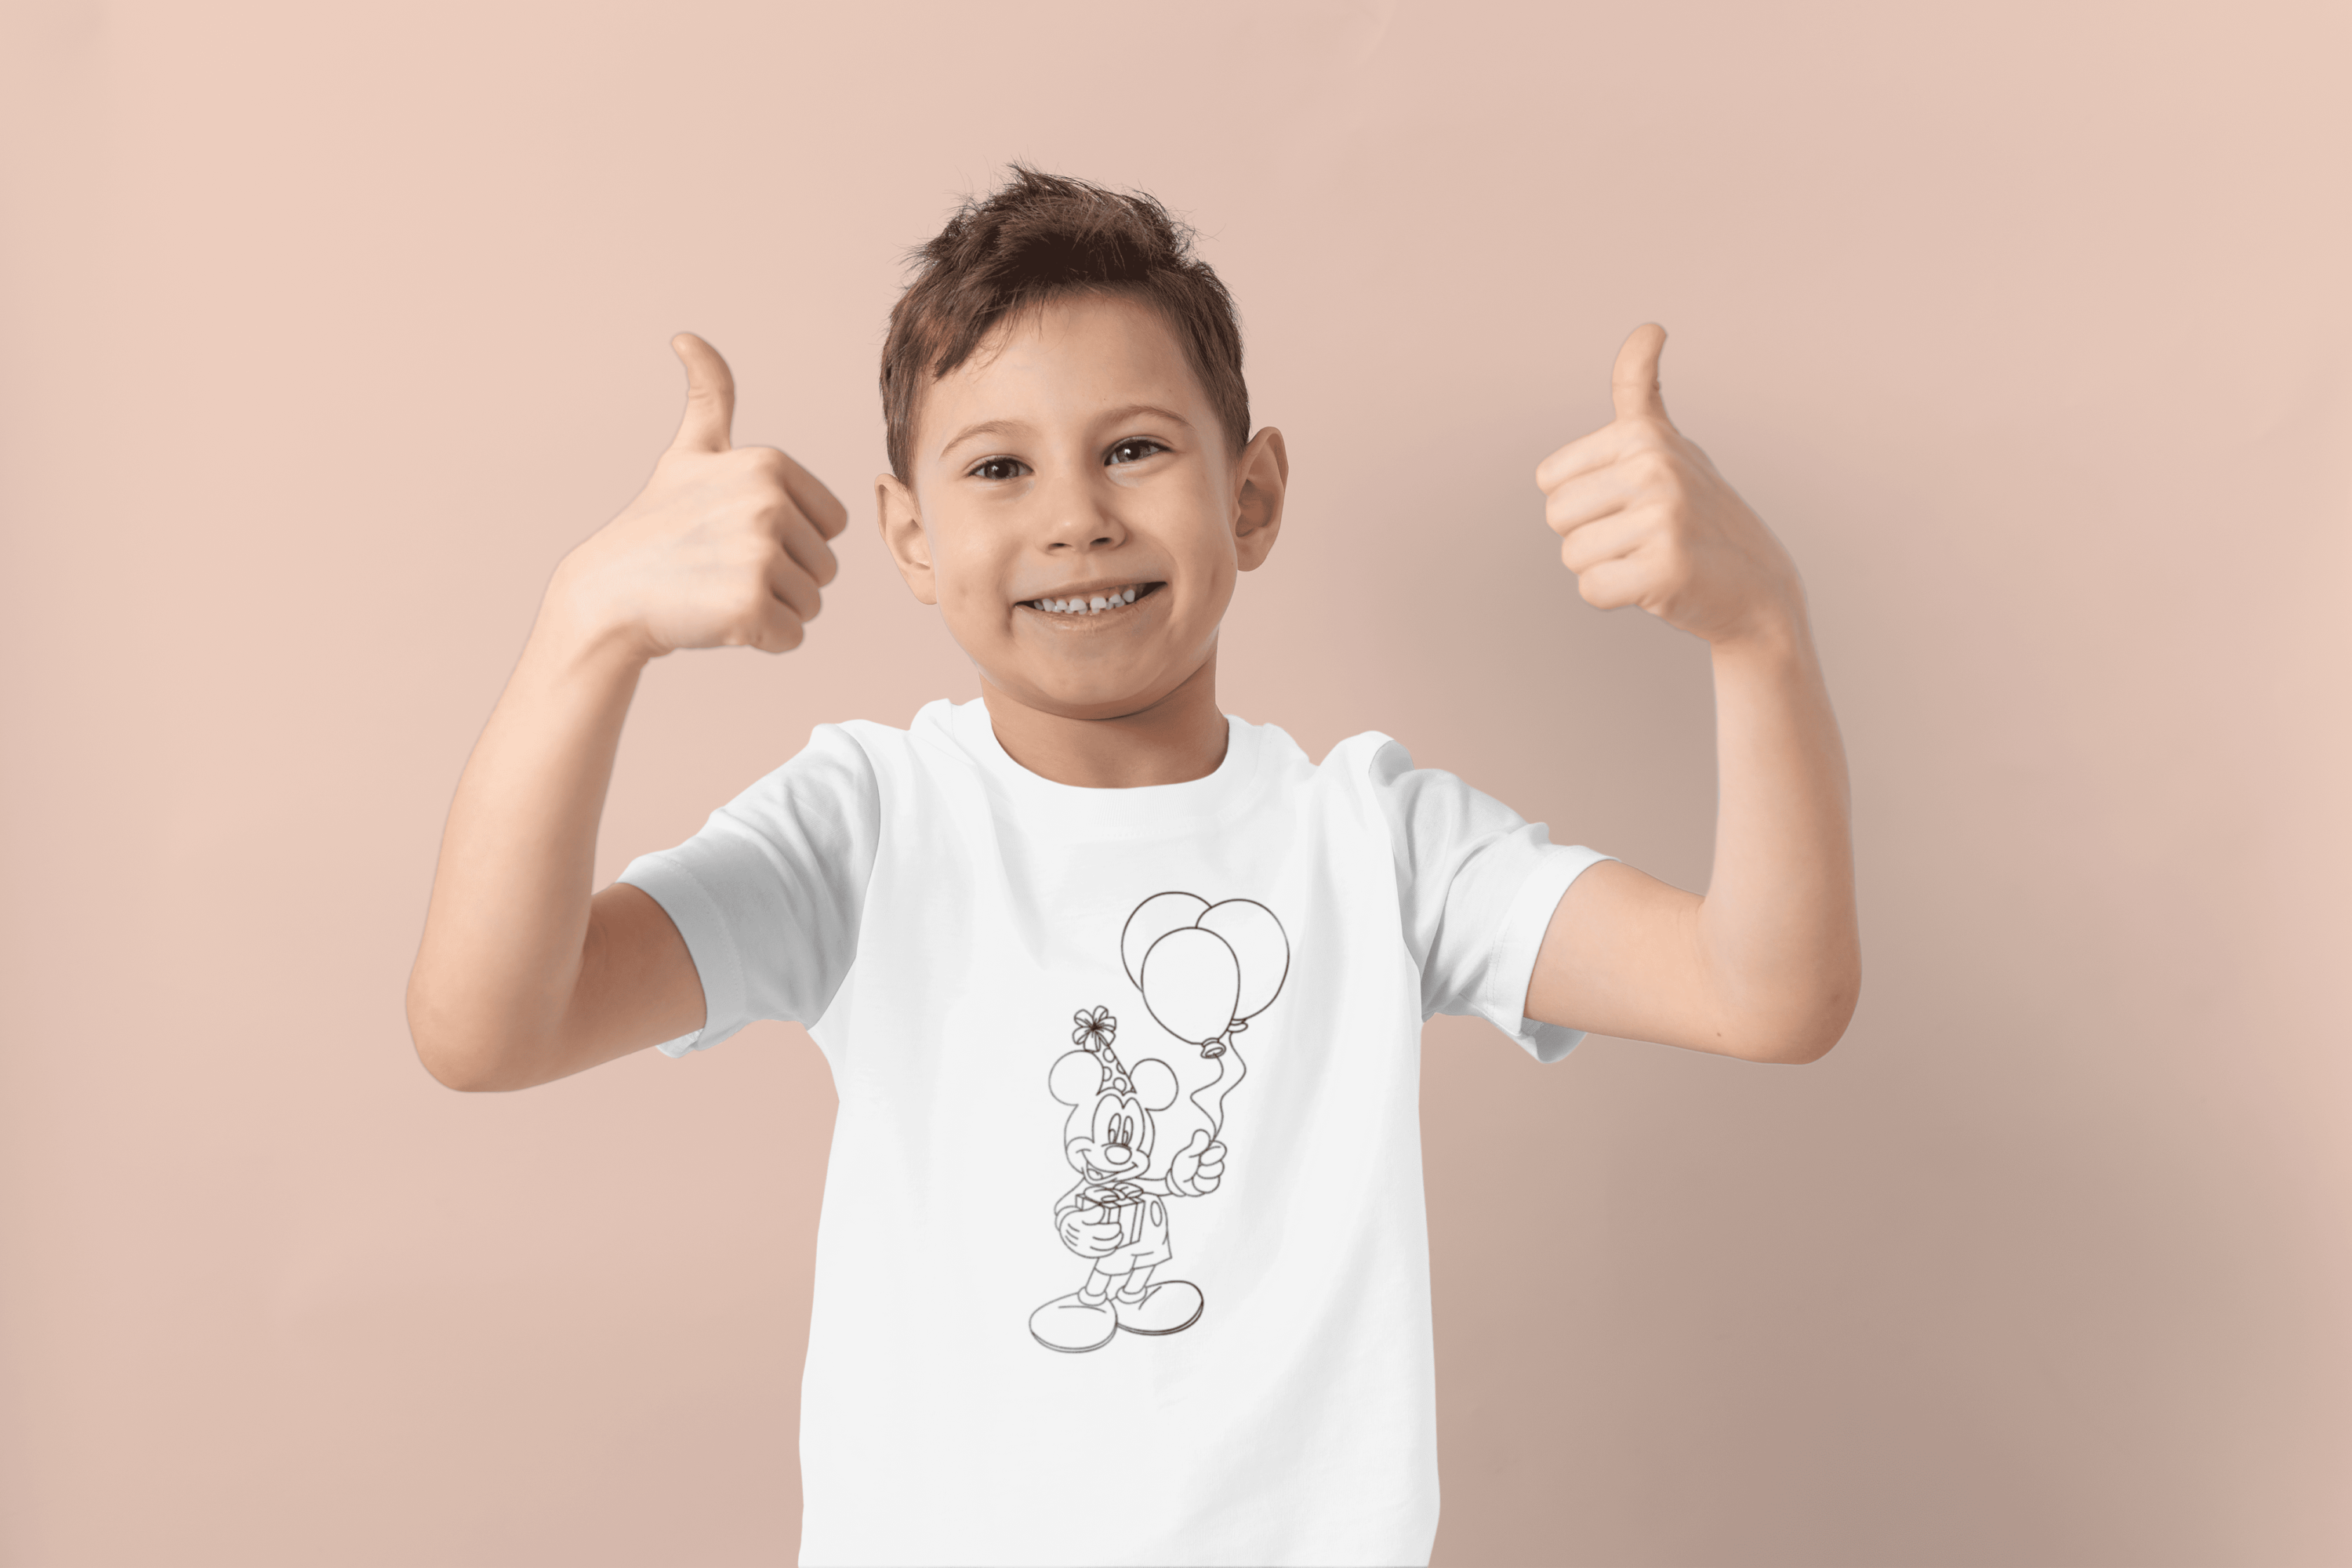 Cool kid's t-shirt with the festive Mickey Louse in an outline.